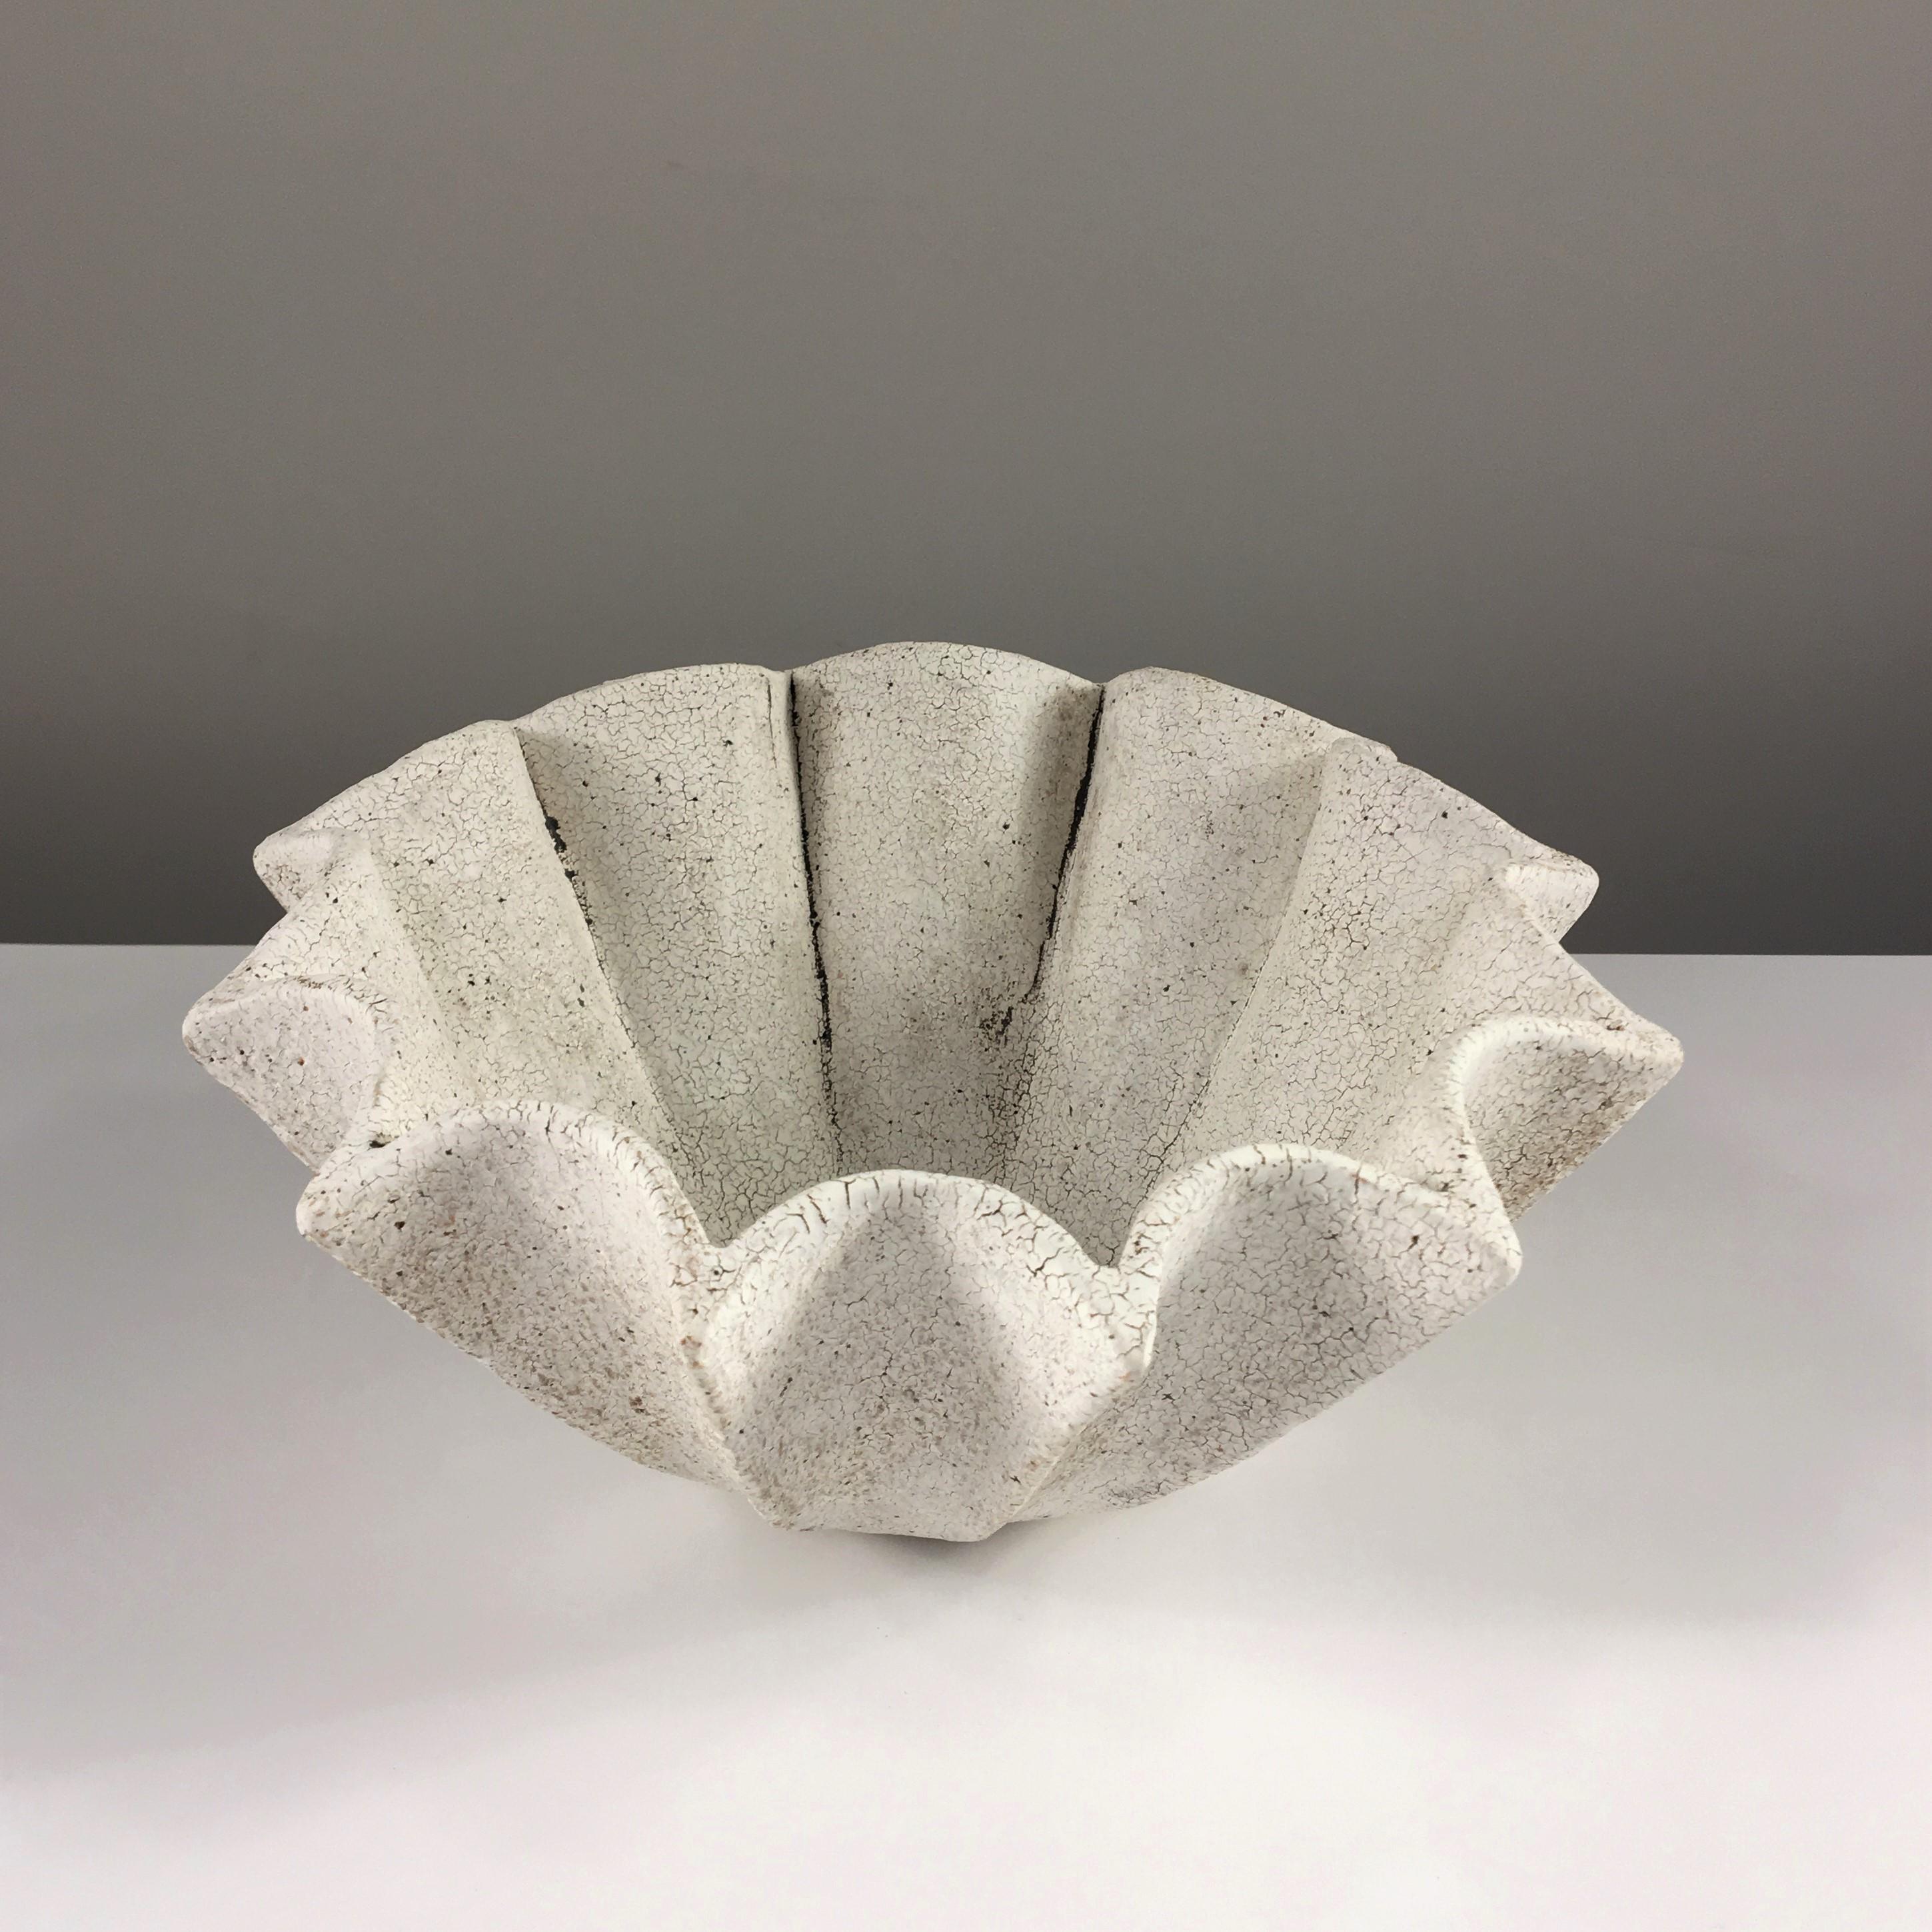 Ceramic Star Bowl Pottery by Yumiko Kuga. Dimensions: Height 4.25